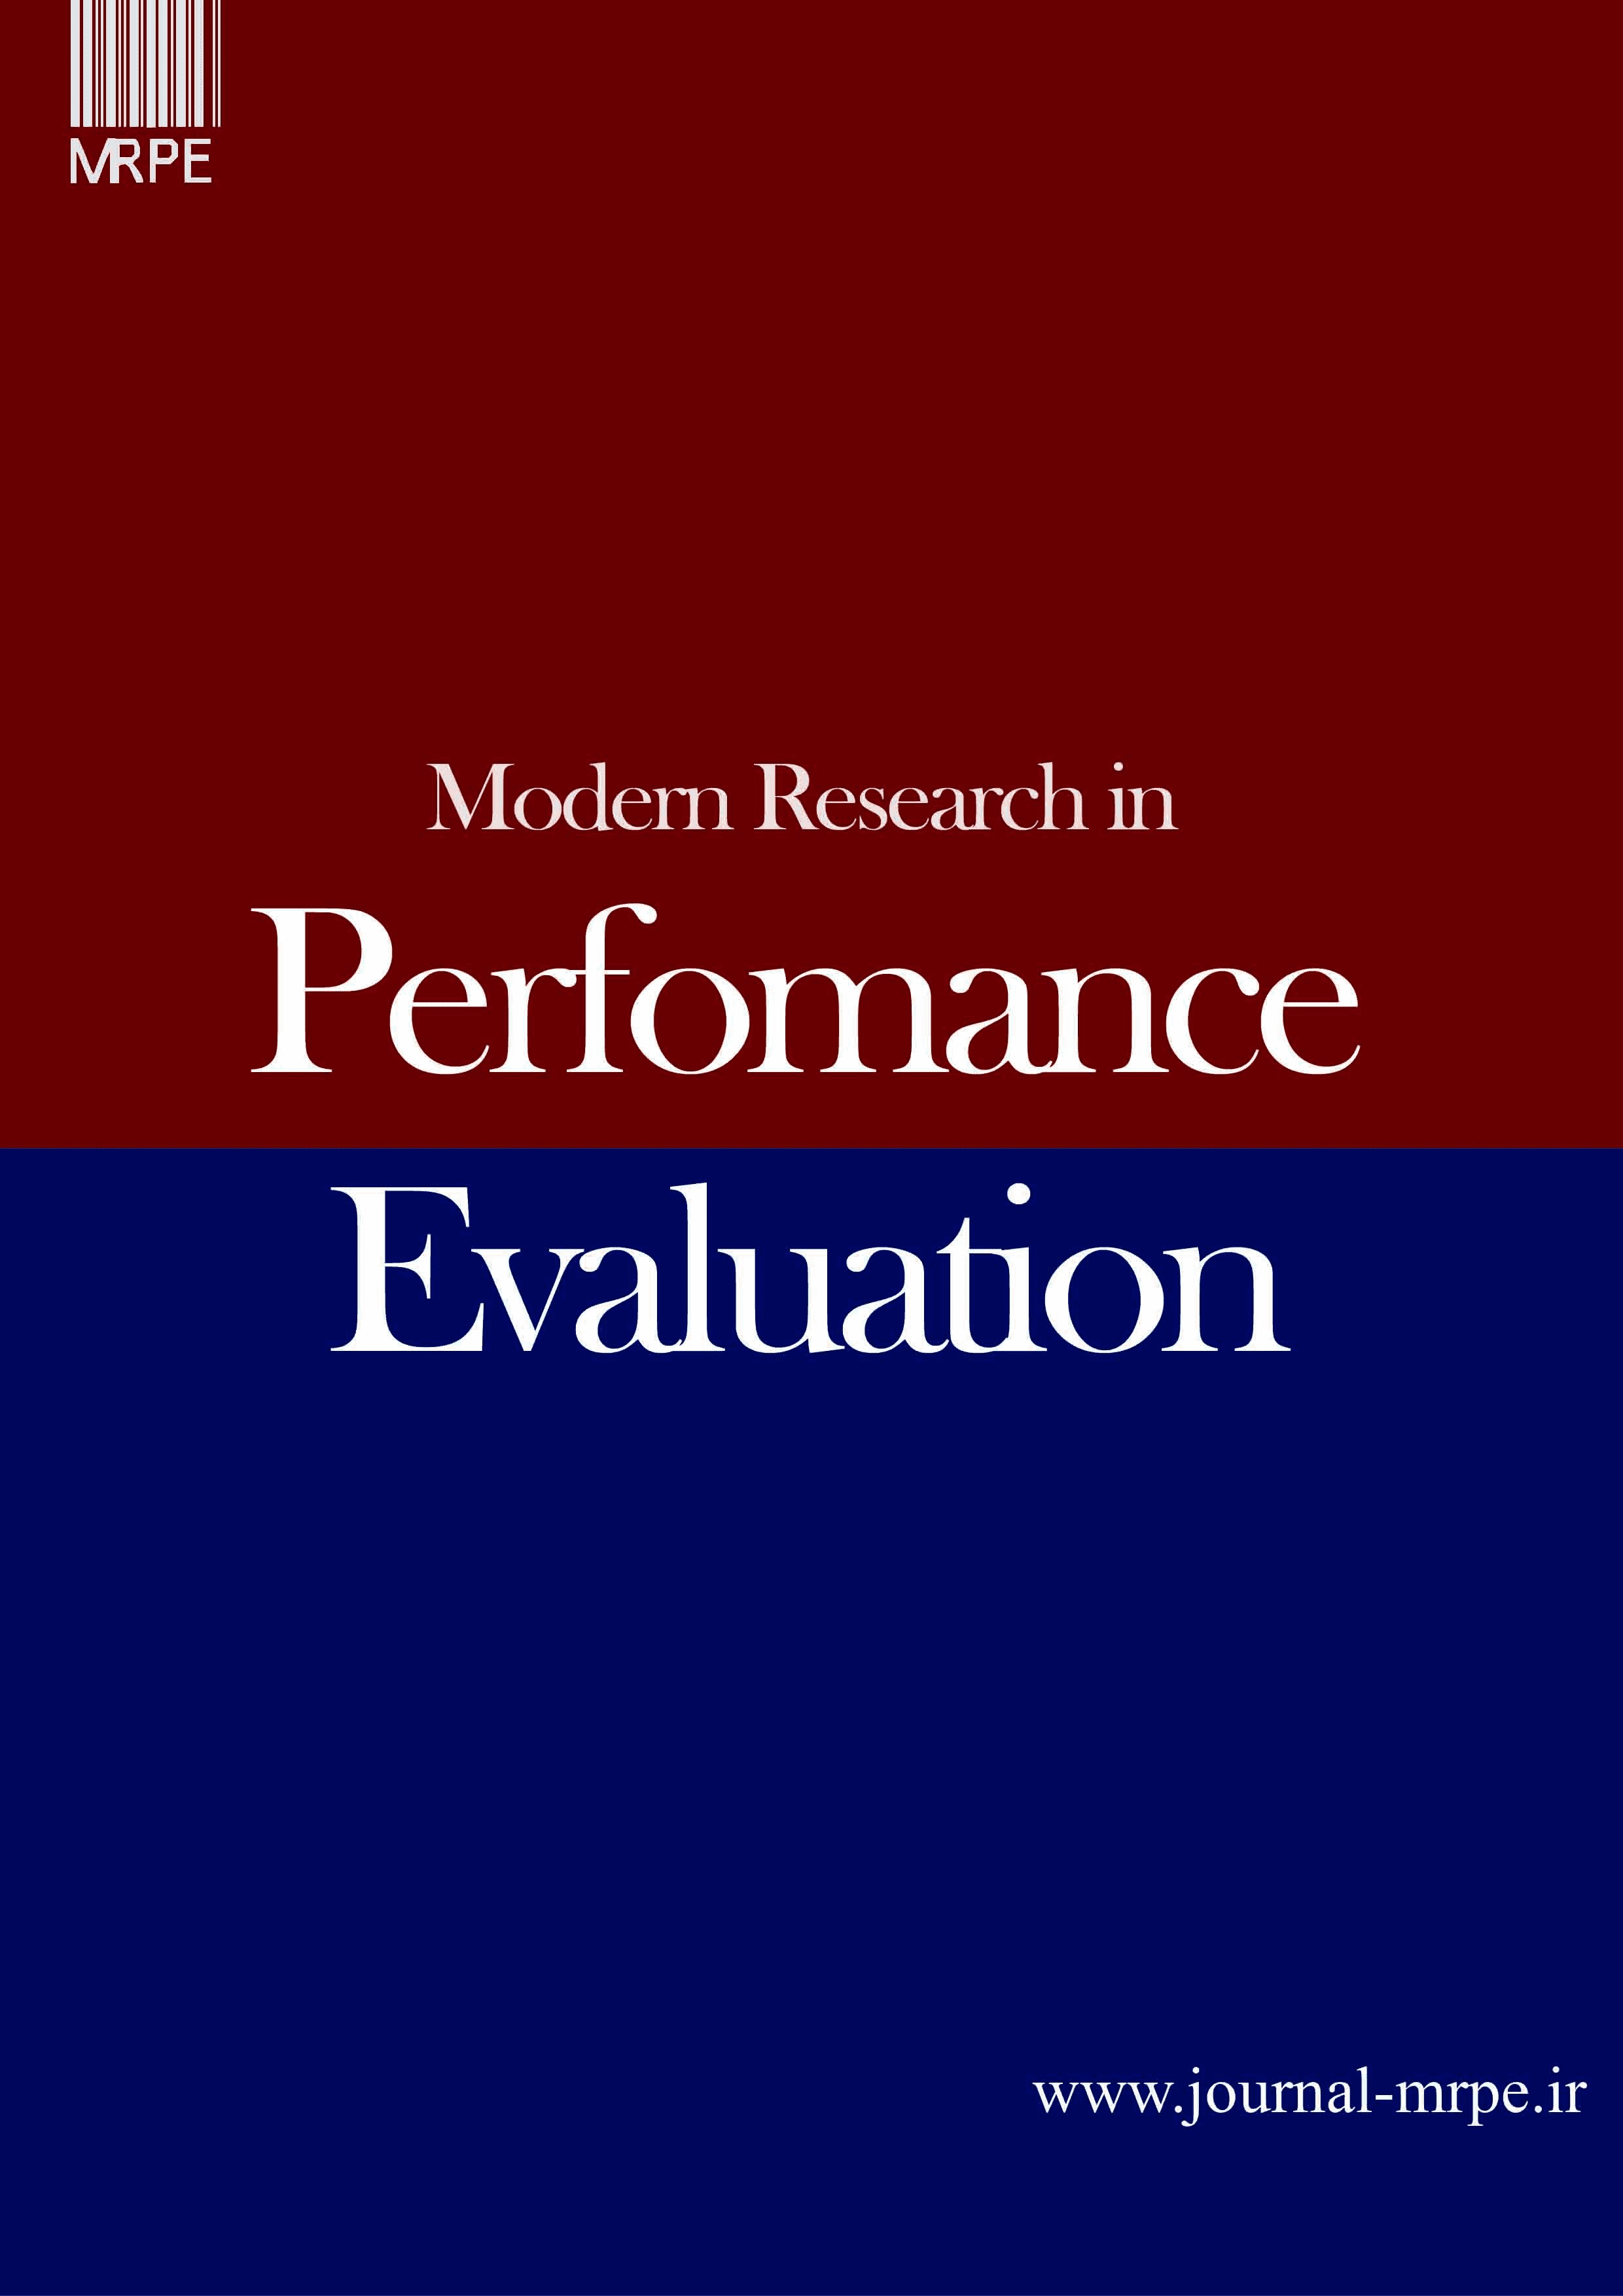 Modern Research in Performance Evaluation